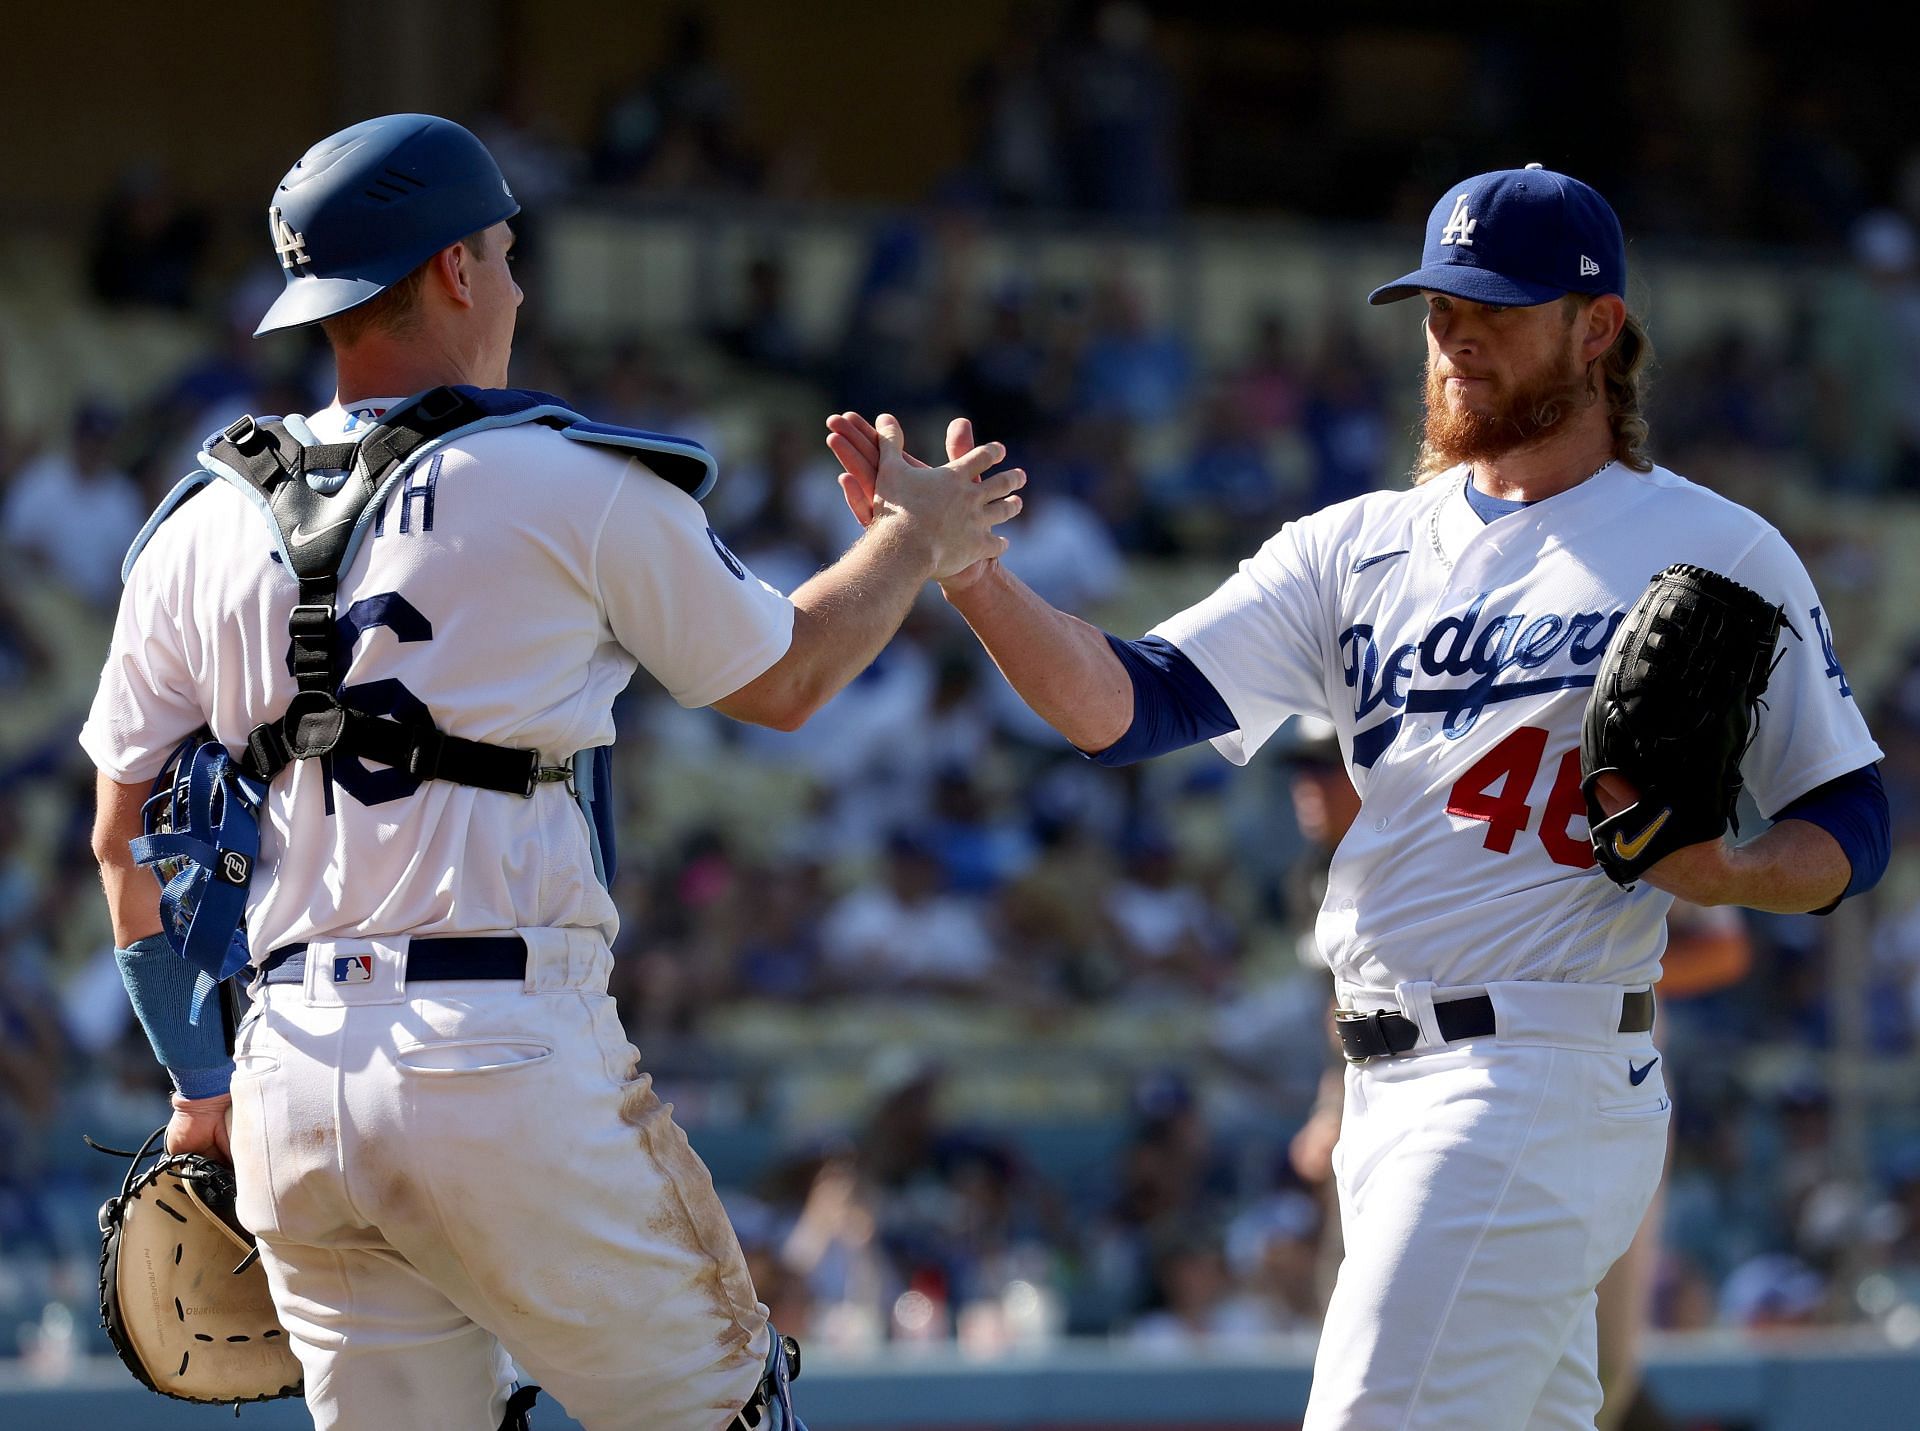 Dodgers closer Kimbrel walks out to 'Let It Go